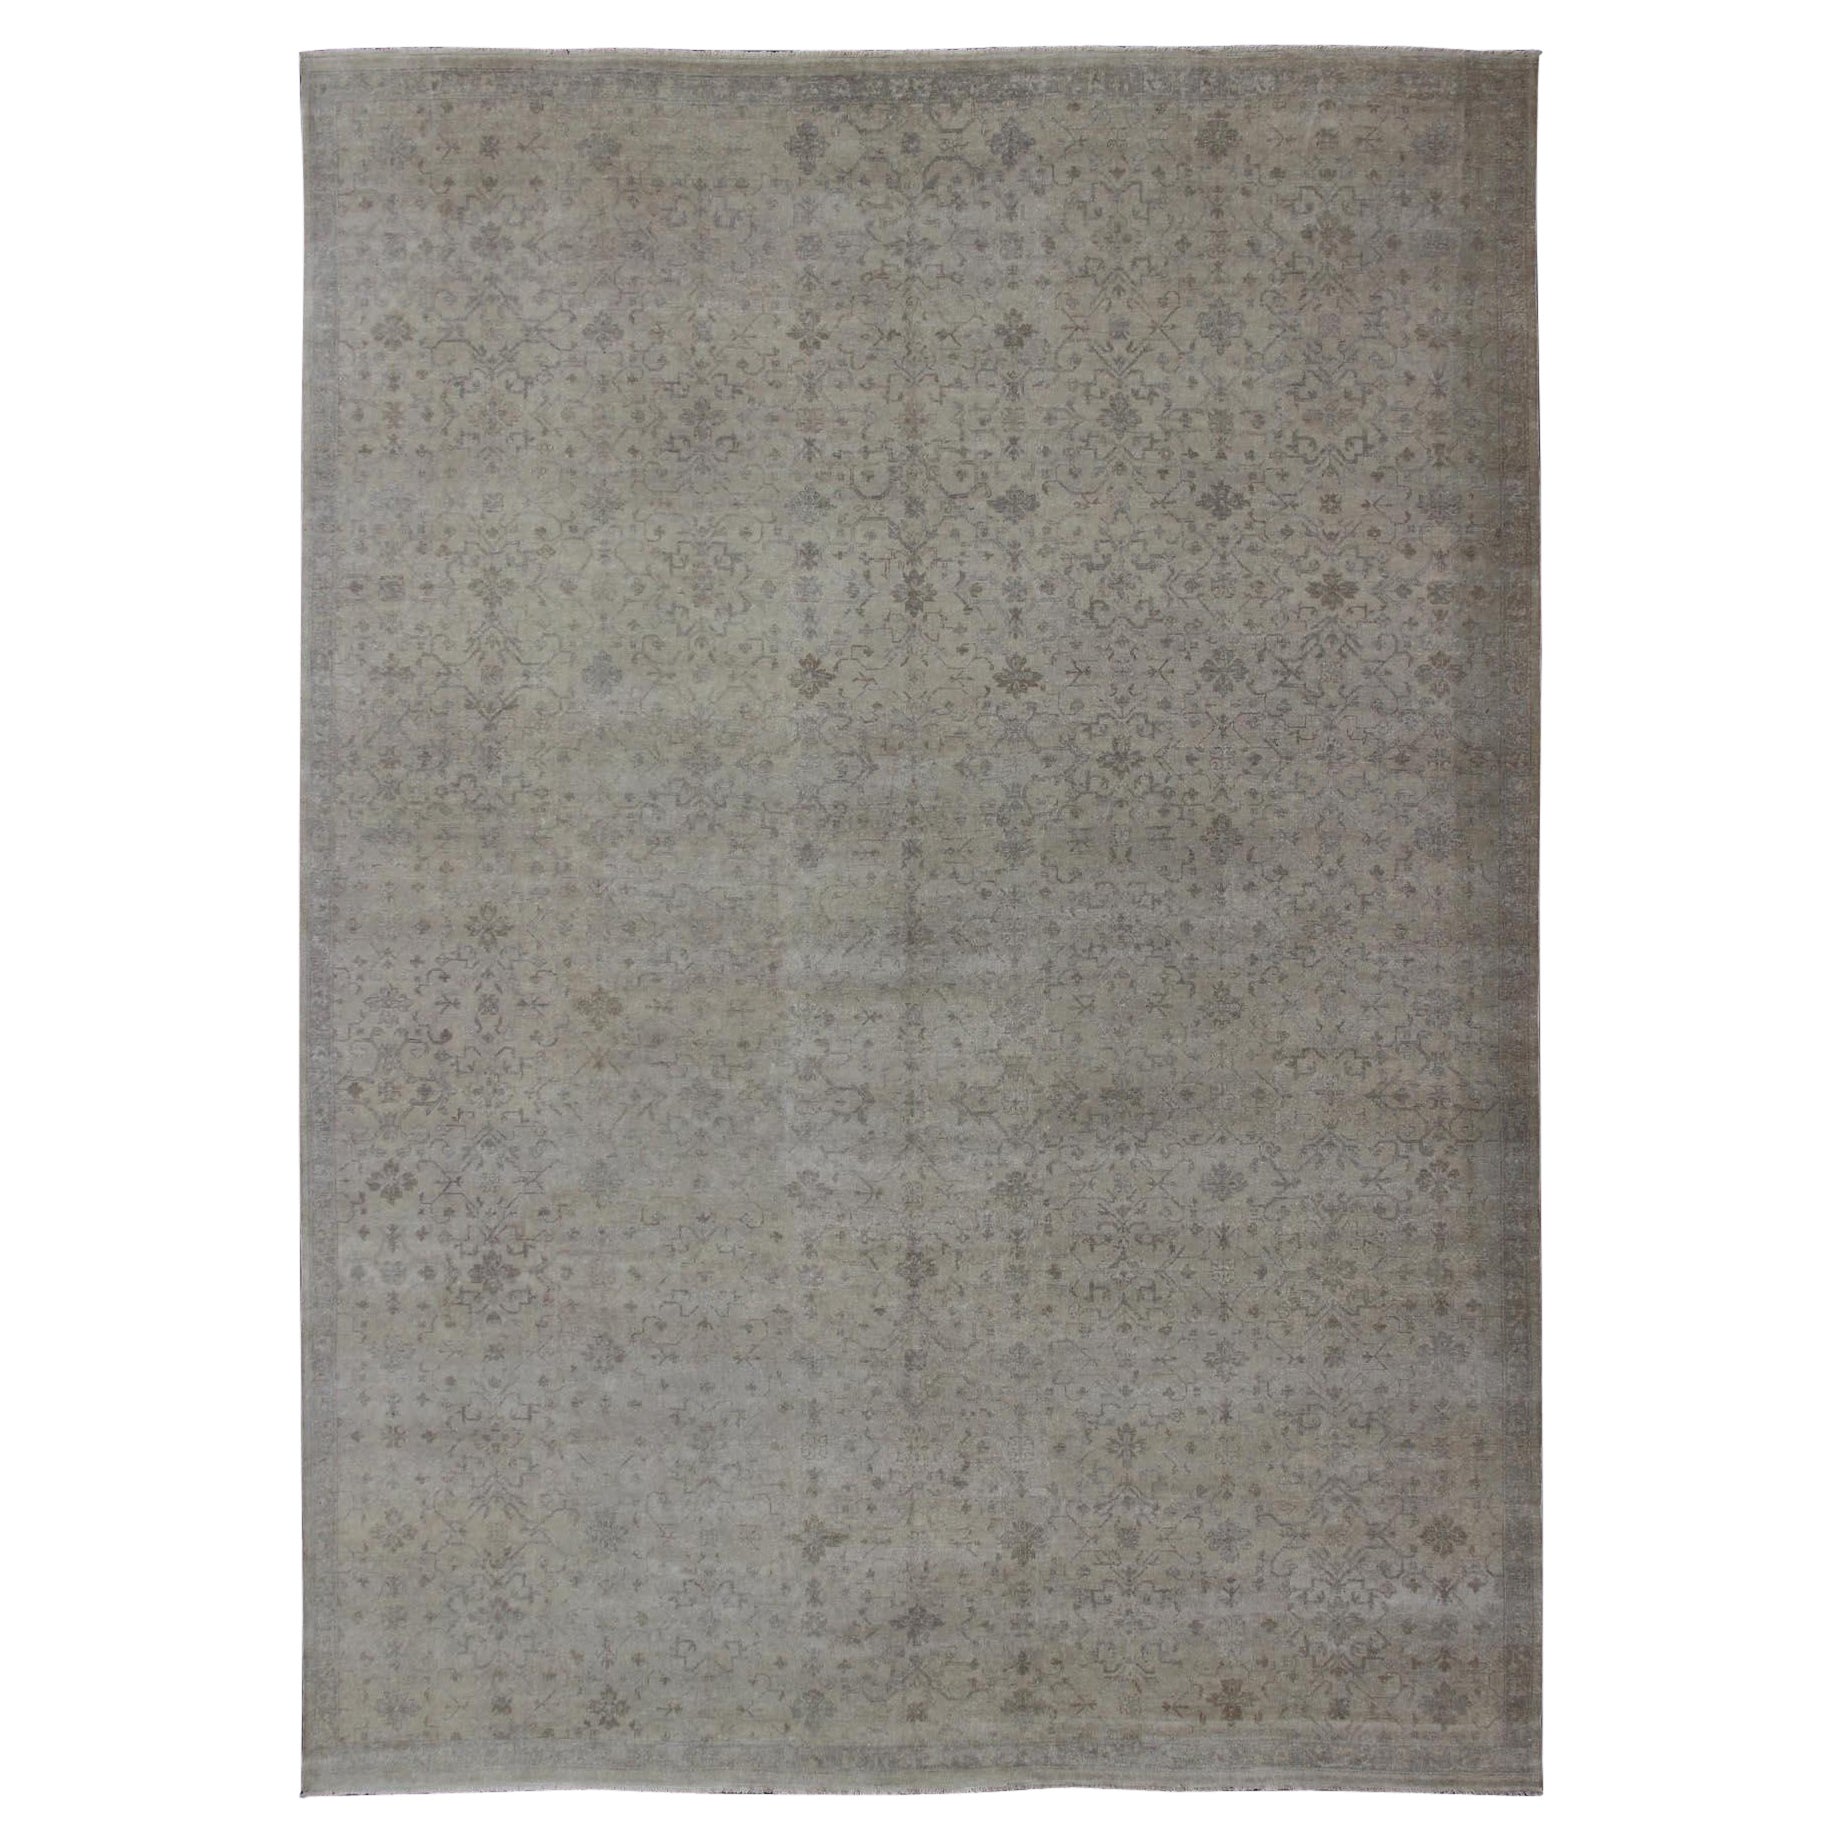 Large Transitional Rug with All-Over Design in Tan, Gray, Silver, Light Taupe For Sale